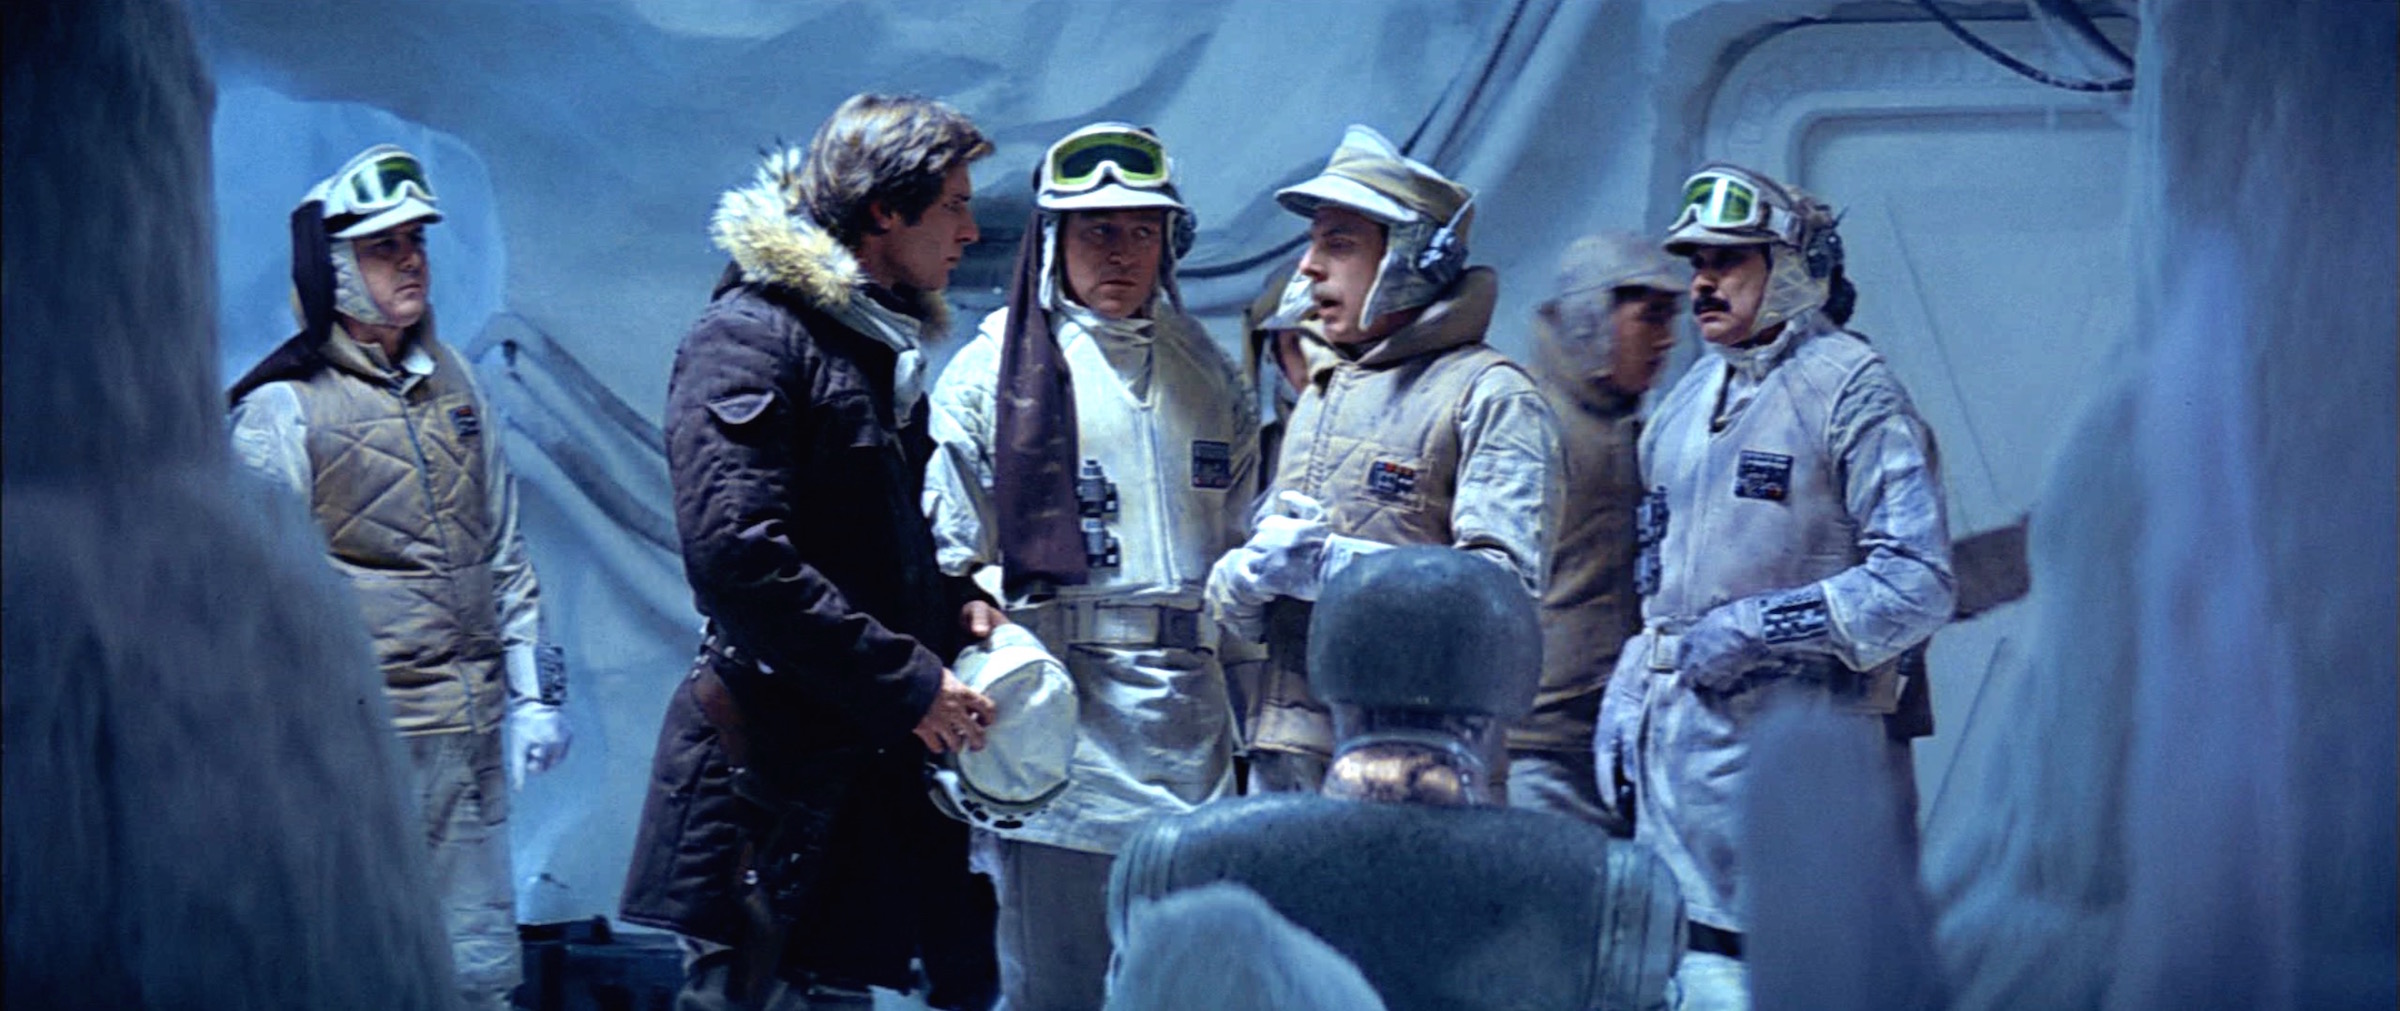 Stand By Ion Control Finding An Actual Hoth Rebel Vest